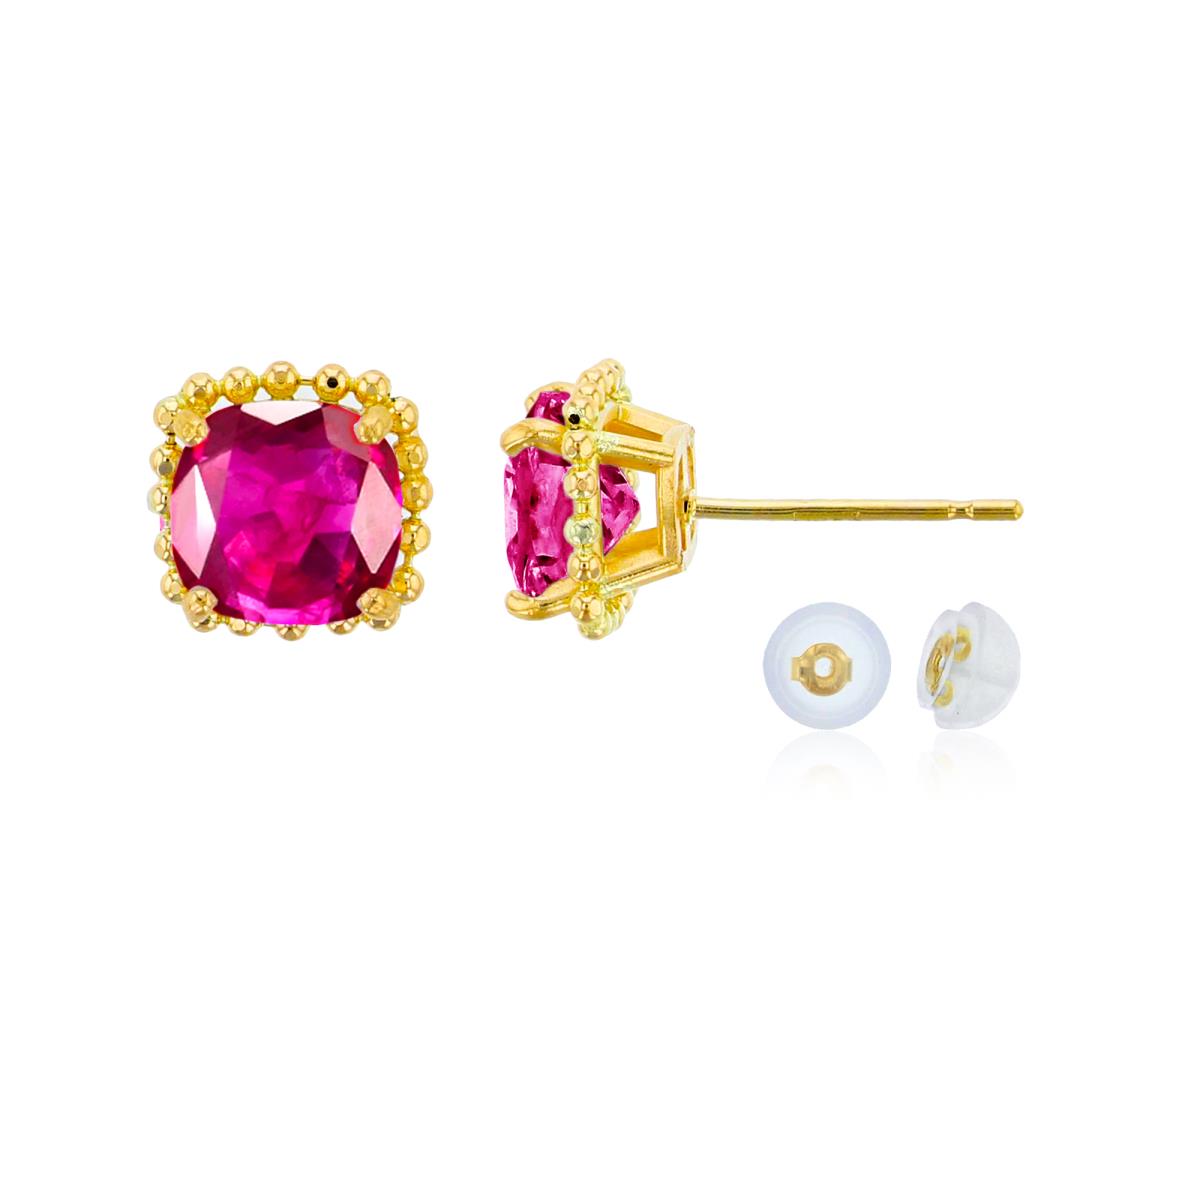 10K Yellow Gold 6x6mm Cushion Cut Created Ruby Bead Frame Stud Earring with Silicone Back